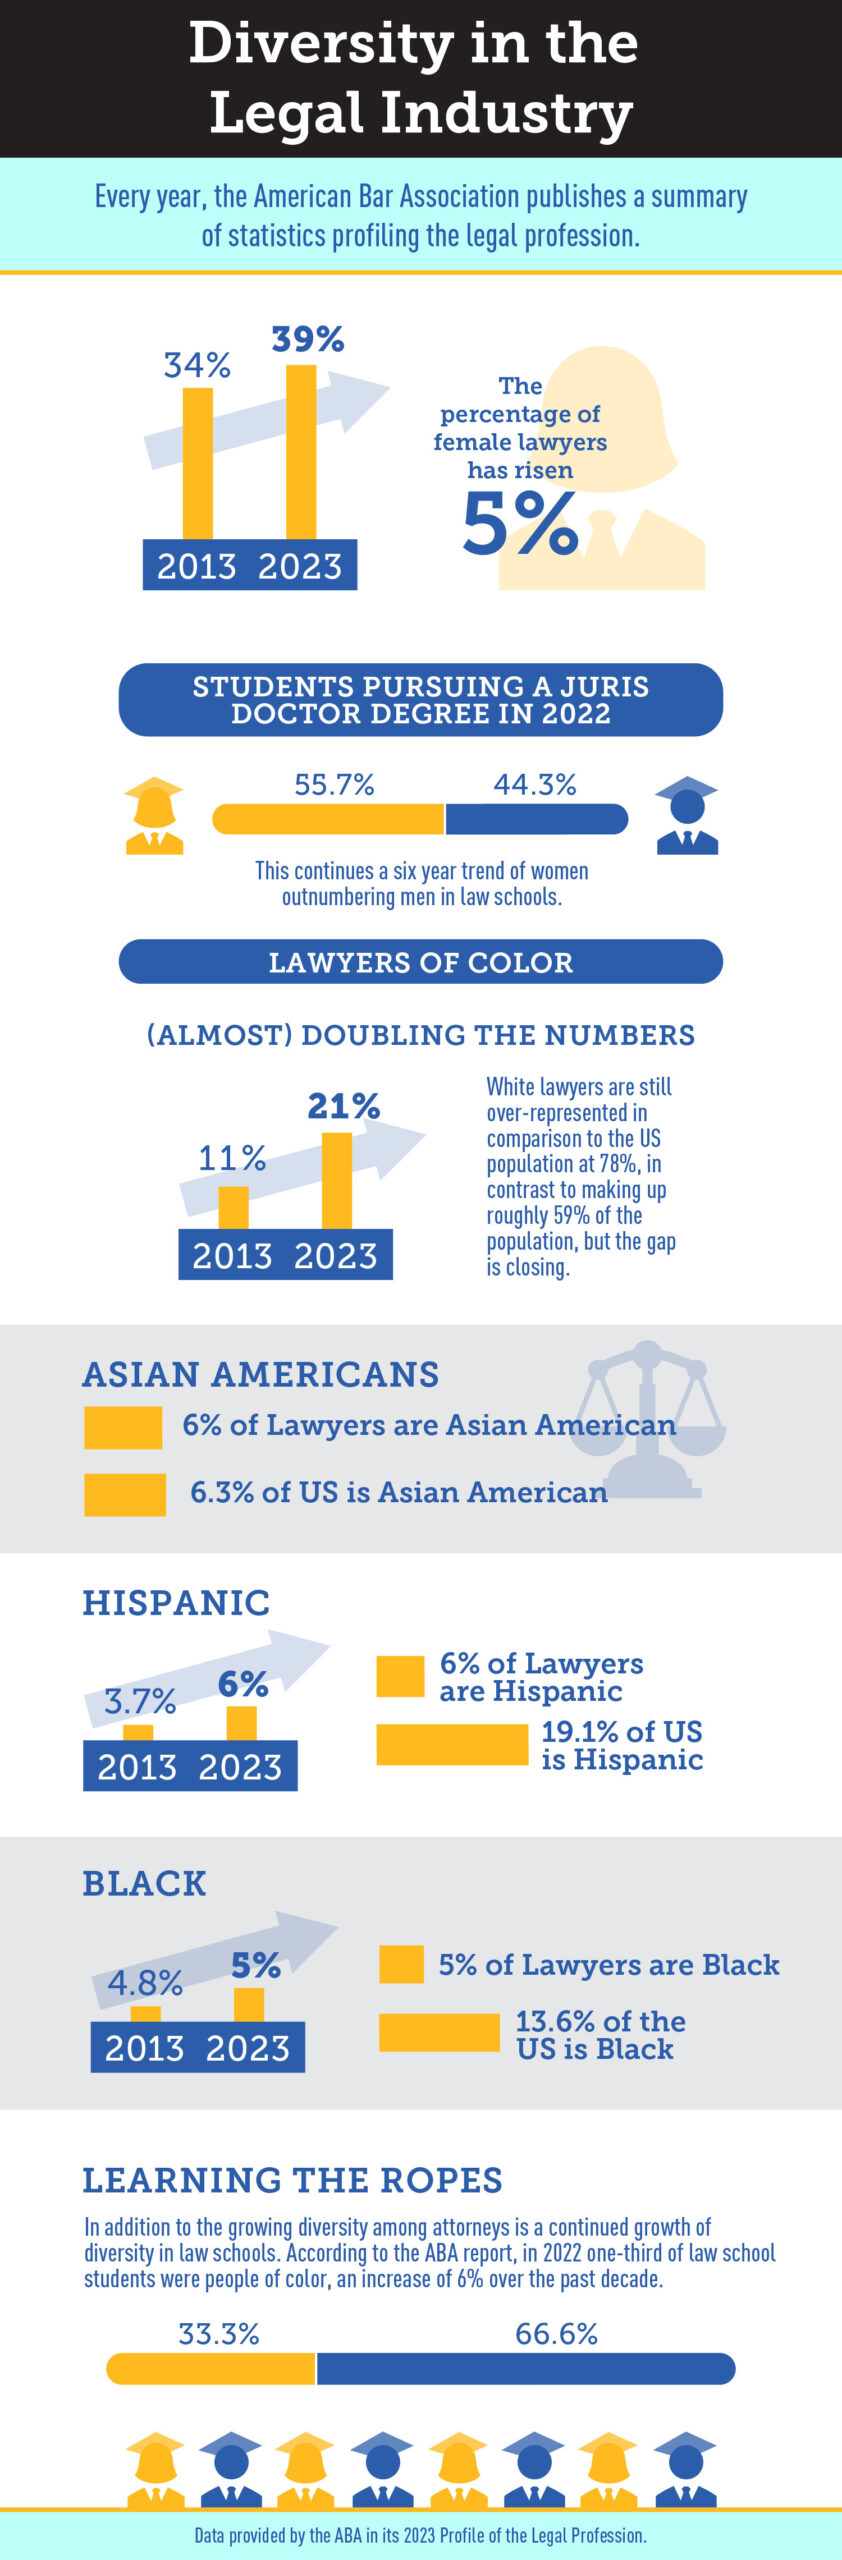 Infographic titled Diversity in the Legal Industry, subtitled Every year, the American Bar Association publishes a summary of statistics profiling the legal profession. 2 stacked bars with an arrow through them going upwards. The stacked bar on the left represents the percentage of female lawyers in 2013 at 34% and the stacked bar on the right represents the percentage of female lawyers in 2023 at 39%. Image of an outline of a woman, subtitled the percentage of female lawyers has risen by 5%. Subtitle Students Pursuing a Juris Doctor Degree in 2022. A stacked bar with a graphic of a woman on the left and man on the right. The left side of the bar shows 55.7% for women pursuing a JD degree and the right side of the bar shows 44.3% for men pursing a JD degree in 2022. Captioned this continues a six year trend of men outnumbering women in law schools. Subtitle Lawyers of Colors. Caption (Almost doubling the numbers). Two bars with an upwards facing arrow running through them. The bar on the left shows 11% in 2013 and the bar on the right shows 21% in 2023, reflecting the percentage of lawyers of color in the United States. Captioned White lawyers are still over-represented in comparison to the US population at 78%, in comparison to making up roughly 59% of the population, but the gap is closing. Subtitle Asian Americans. Small bar with the caption 6% of lawyers are Asian American. Small bar with the caption 6.3% of the US is Asian American. Subtitle Hispanic. Two small bars with an upwards facing arrow running through them. The bar on the left shows 3.7% in 2013 and the bar on the right shows 6% in 2023, representing the growth in Hispanic lawyers. Two bars, one smaller and one larger. The small bar is captioned 6% of Lawyers are Hispanic. The larger bar is captioned 19.1% of US is Hispanic. Subtitle Black. Two bars with an upwards facing arrow running through them. The bar on the left shows 4.8% in 2013 and 5% in 2023. Two bars, one small and one larger. The small bar is captioned 5% of lawyers are Black. The larger bar is captioned 13.6% of US is Black. Subtitle Learning the Ropes. Captioned In addition to the growing diversity among attorneys is a continued growth of diversity in law schools. According to the ABA report, in 2022 one-third of law school students were people of color, an increase of 6% over the past decade. Stacked bar split between the colors yellow and blue. A third of the bar is yellow at 33.3% representing people of color in law school. Two-thirds of the bar is blue at 66.6% representing white people in law school. Data provided by the ABA in the 2023 profile of the legal profession. 